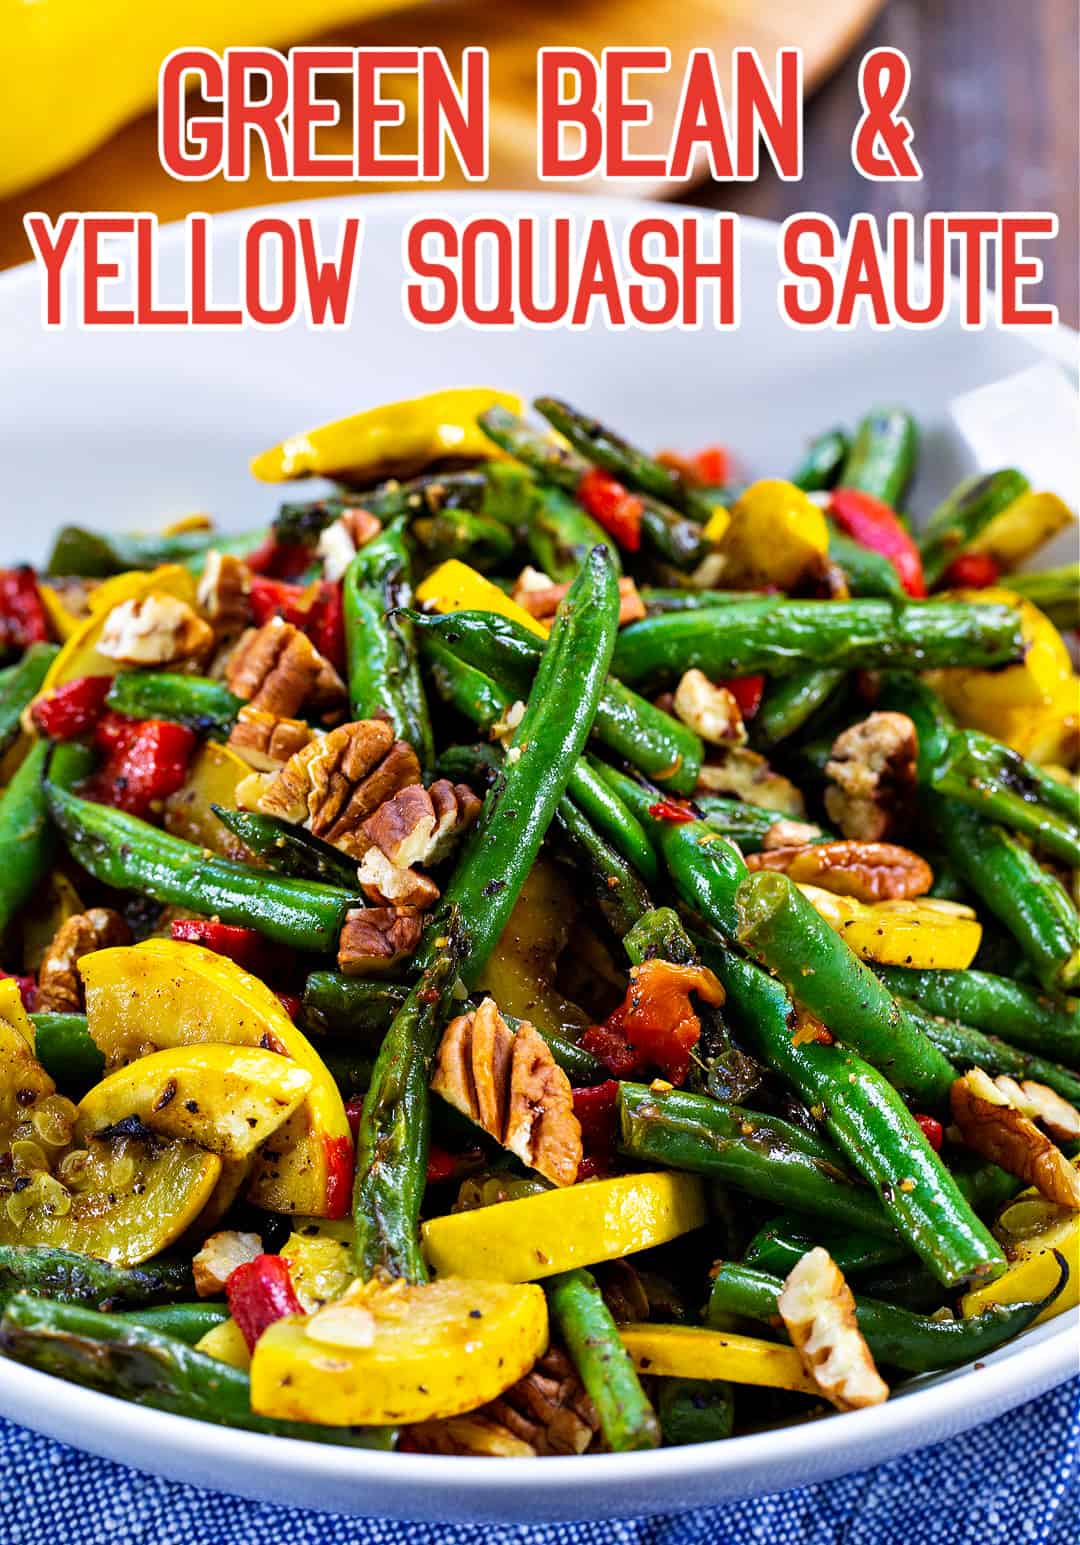 Green Bean and Yellow Squash Saute in a bowl.